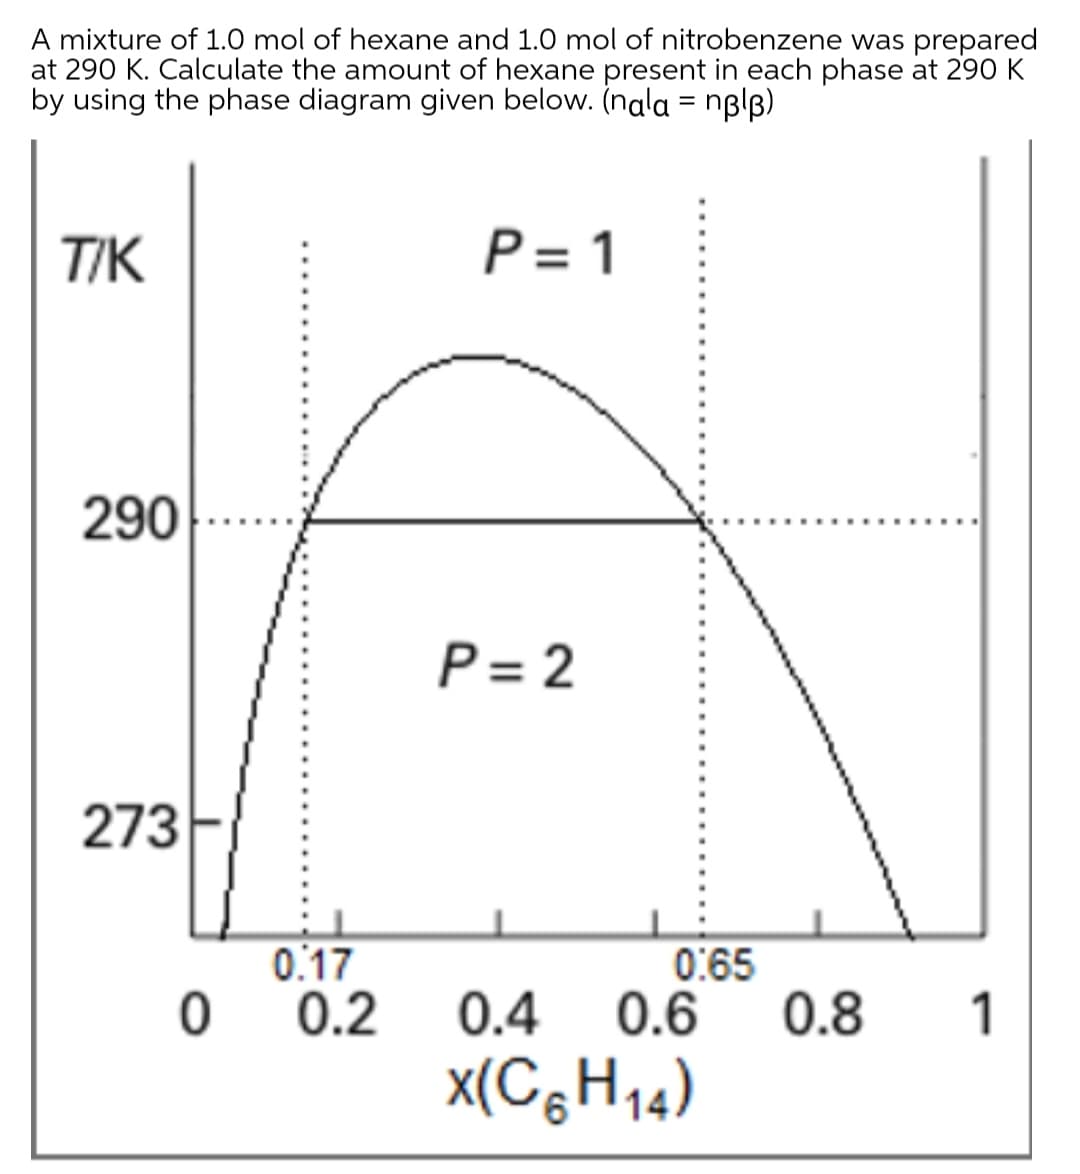 A mixture of 1.0 mol of hexane and 1.0 mol of nitrobenzene was prepared
at 290 K. Calculate the amount of hexane present in each phase at 290 K
by using the phase diagram given below. (nala = nglp)
T/K
P= 1
290
P= 2
273
0.17
ㅇ
0.2
0:65
0.8
0.6
0.4
1
x(C;H14)
